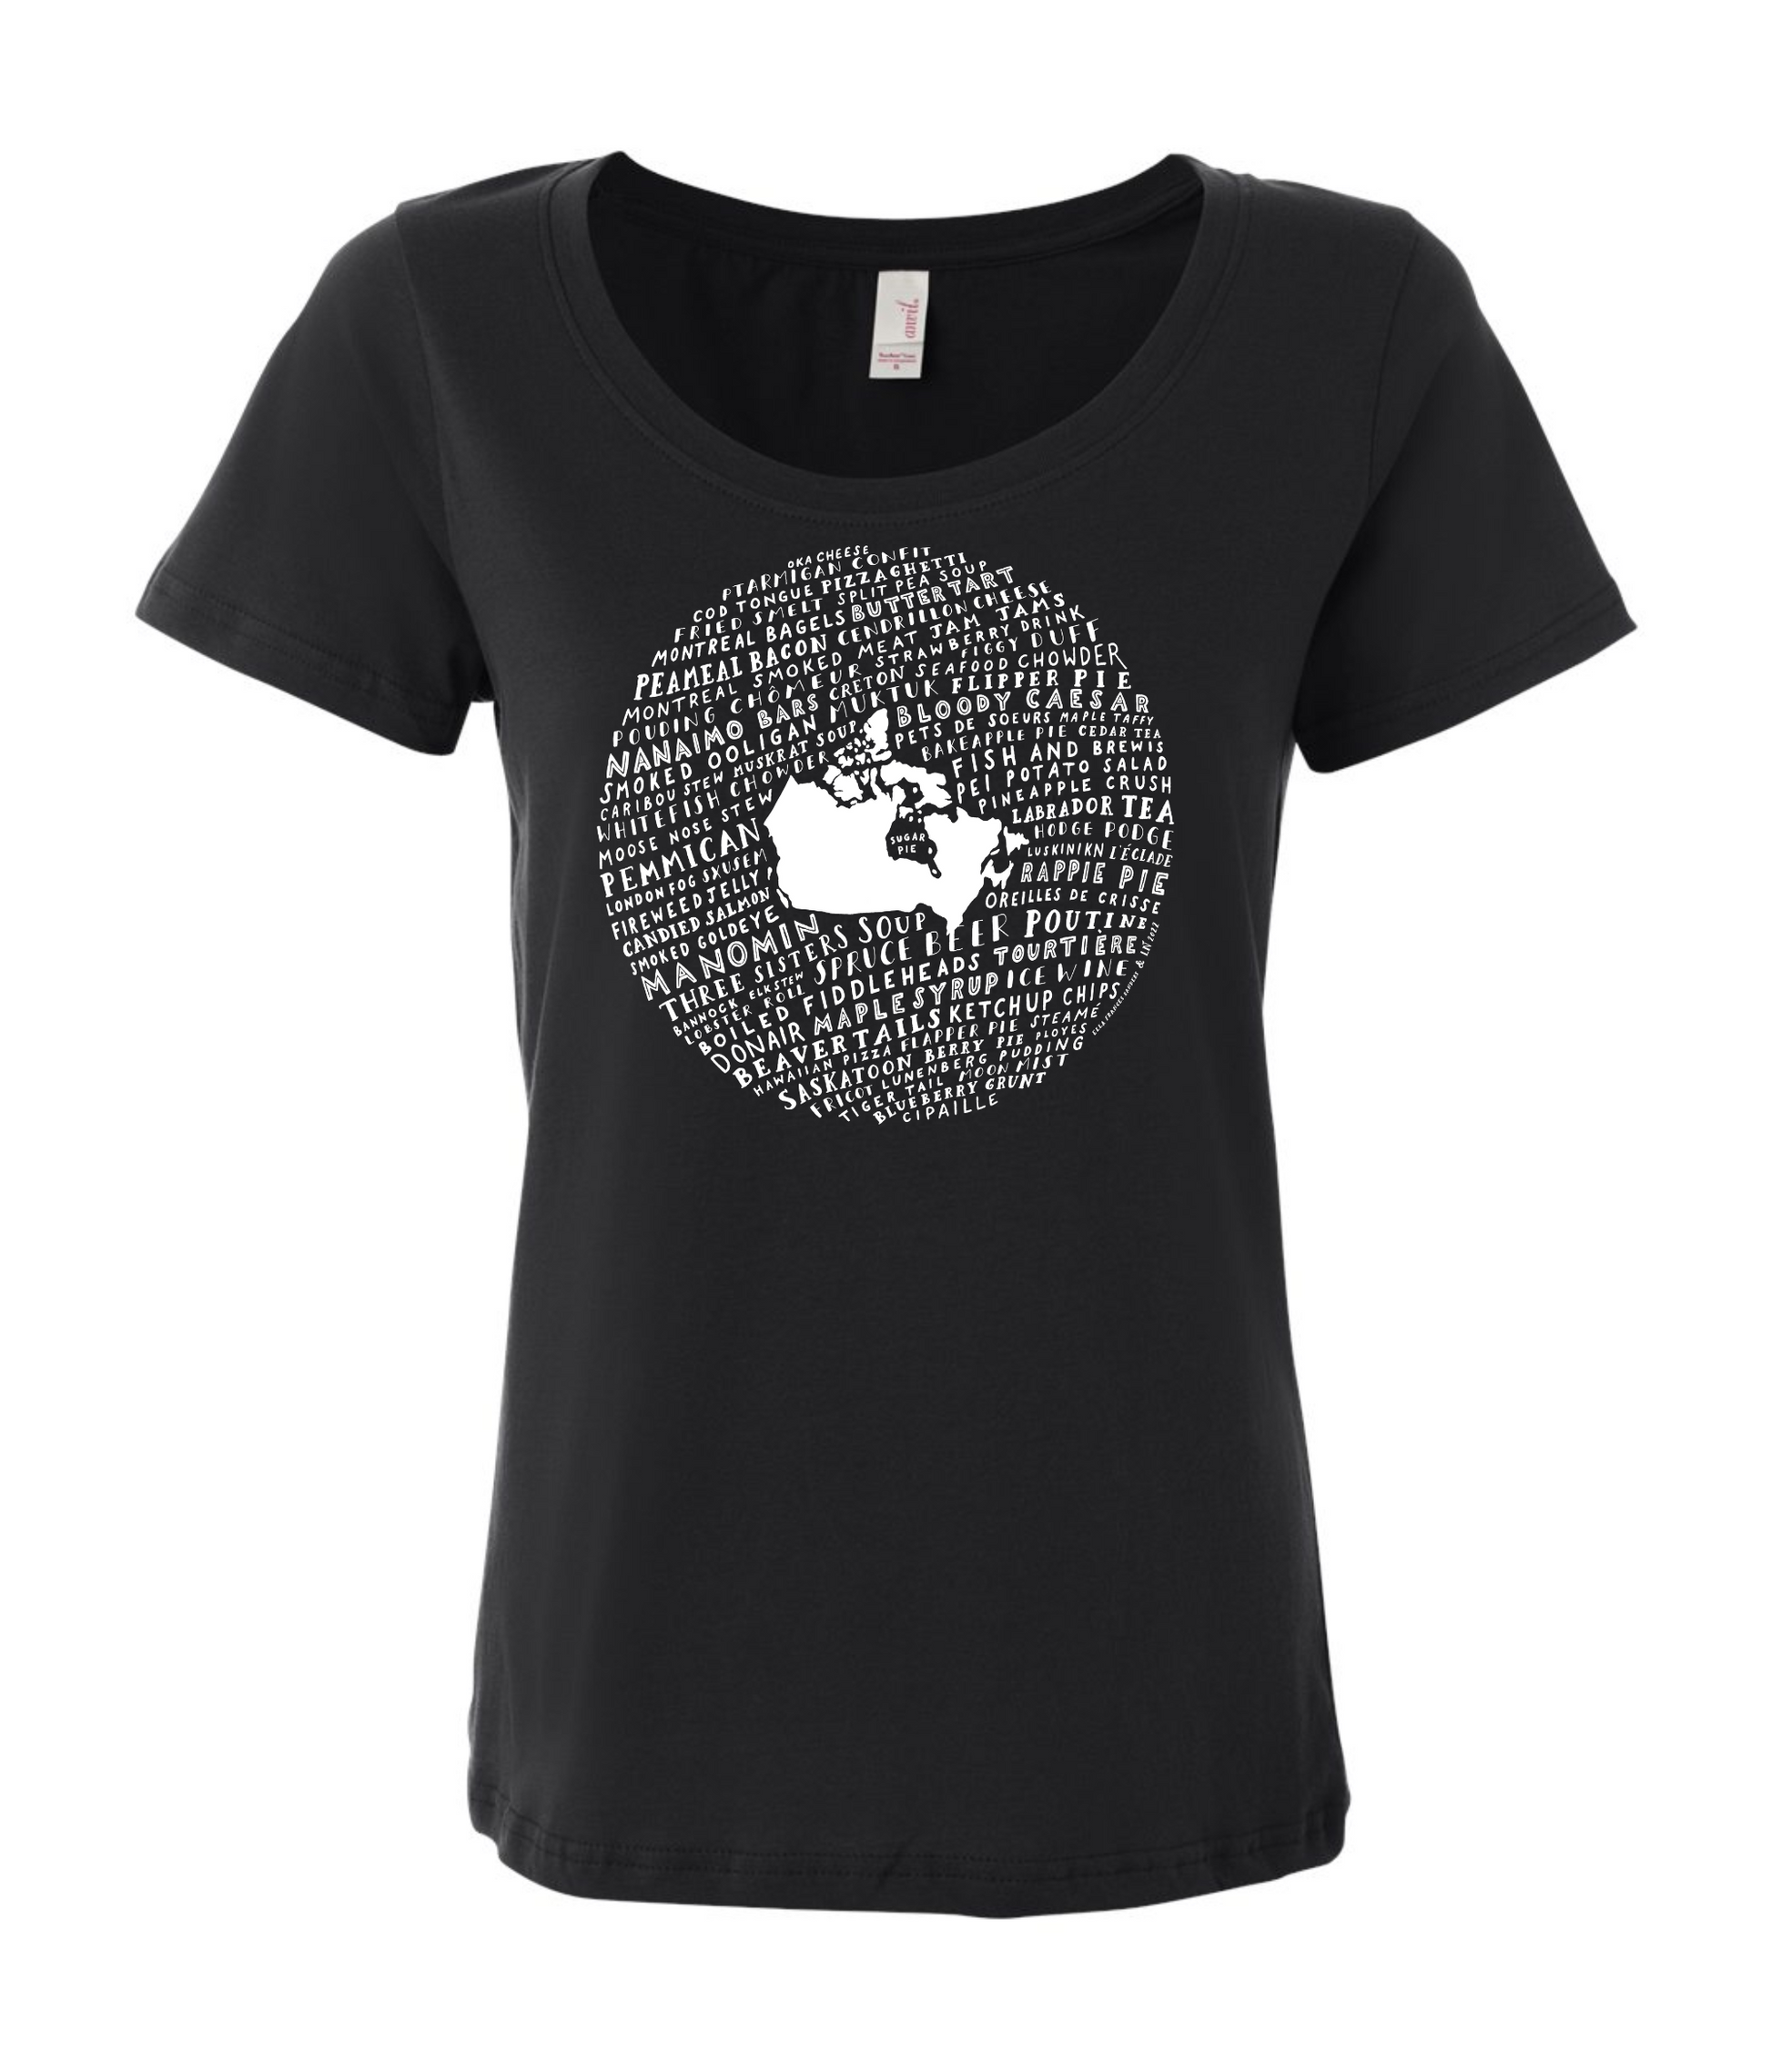 Food Map of Canada T-Shirt - Women's Black Soft Tee – The Legal Nomads Shop